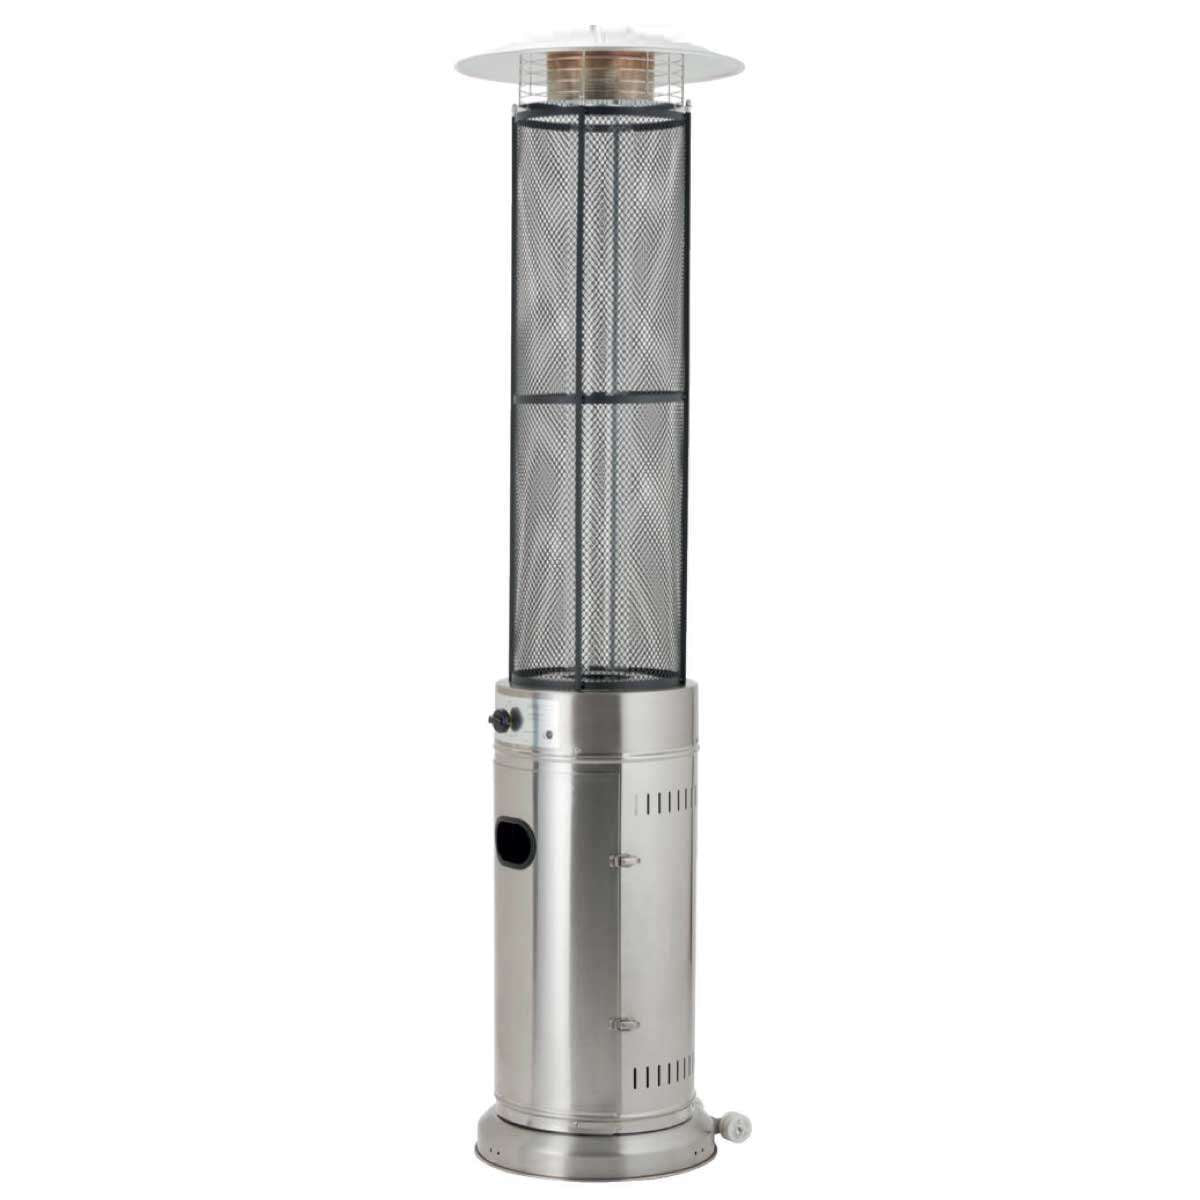 Exceptional Garden:Lifestyle Emporio Stainless Steel Flame Heater